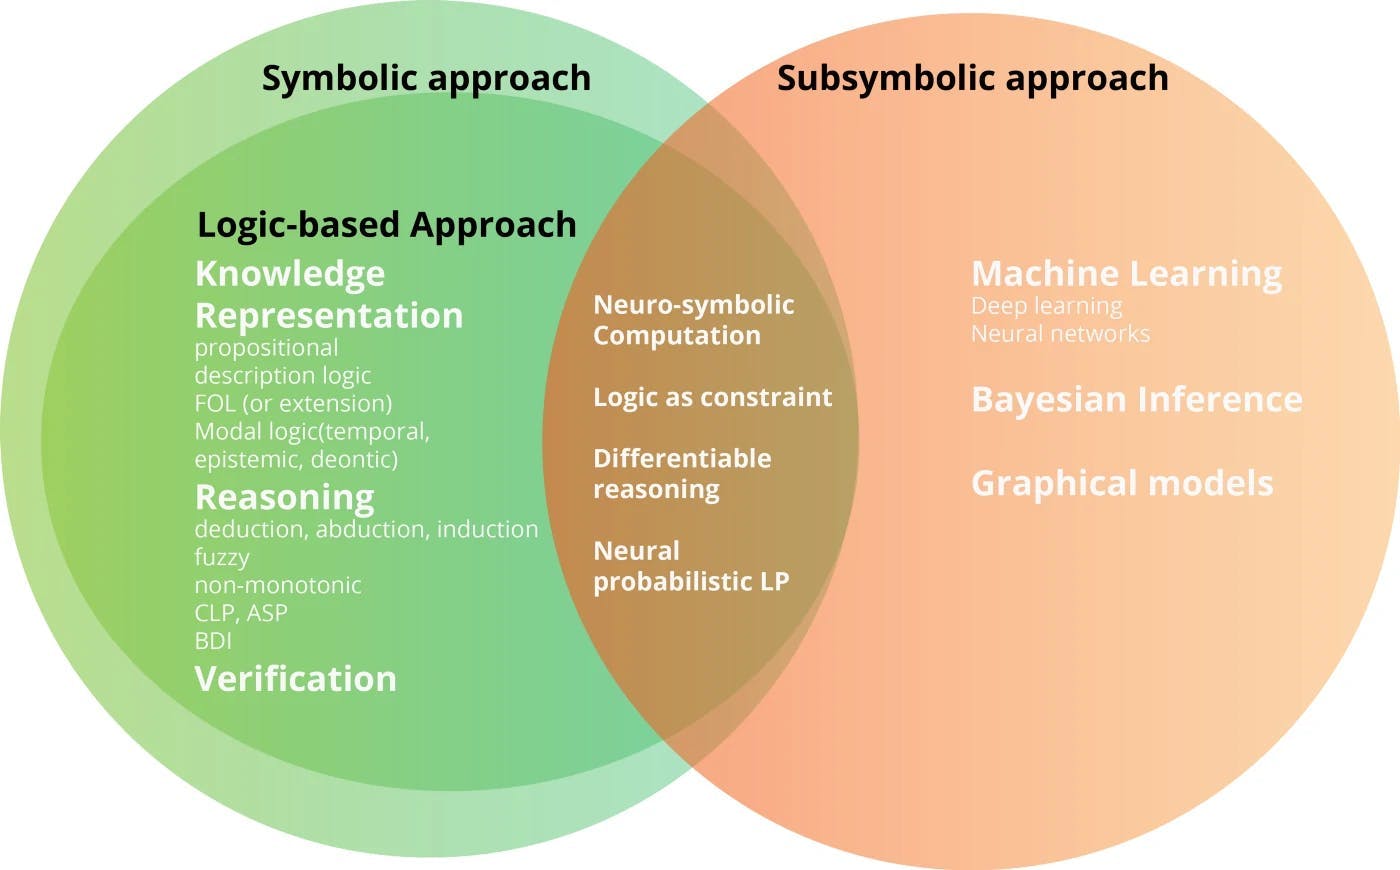 Graphic showing the symbolic approach vs. subsymbolic approach in using AI